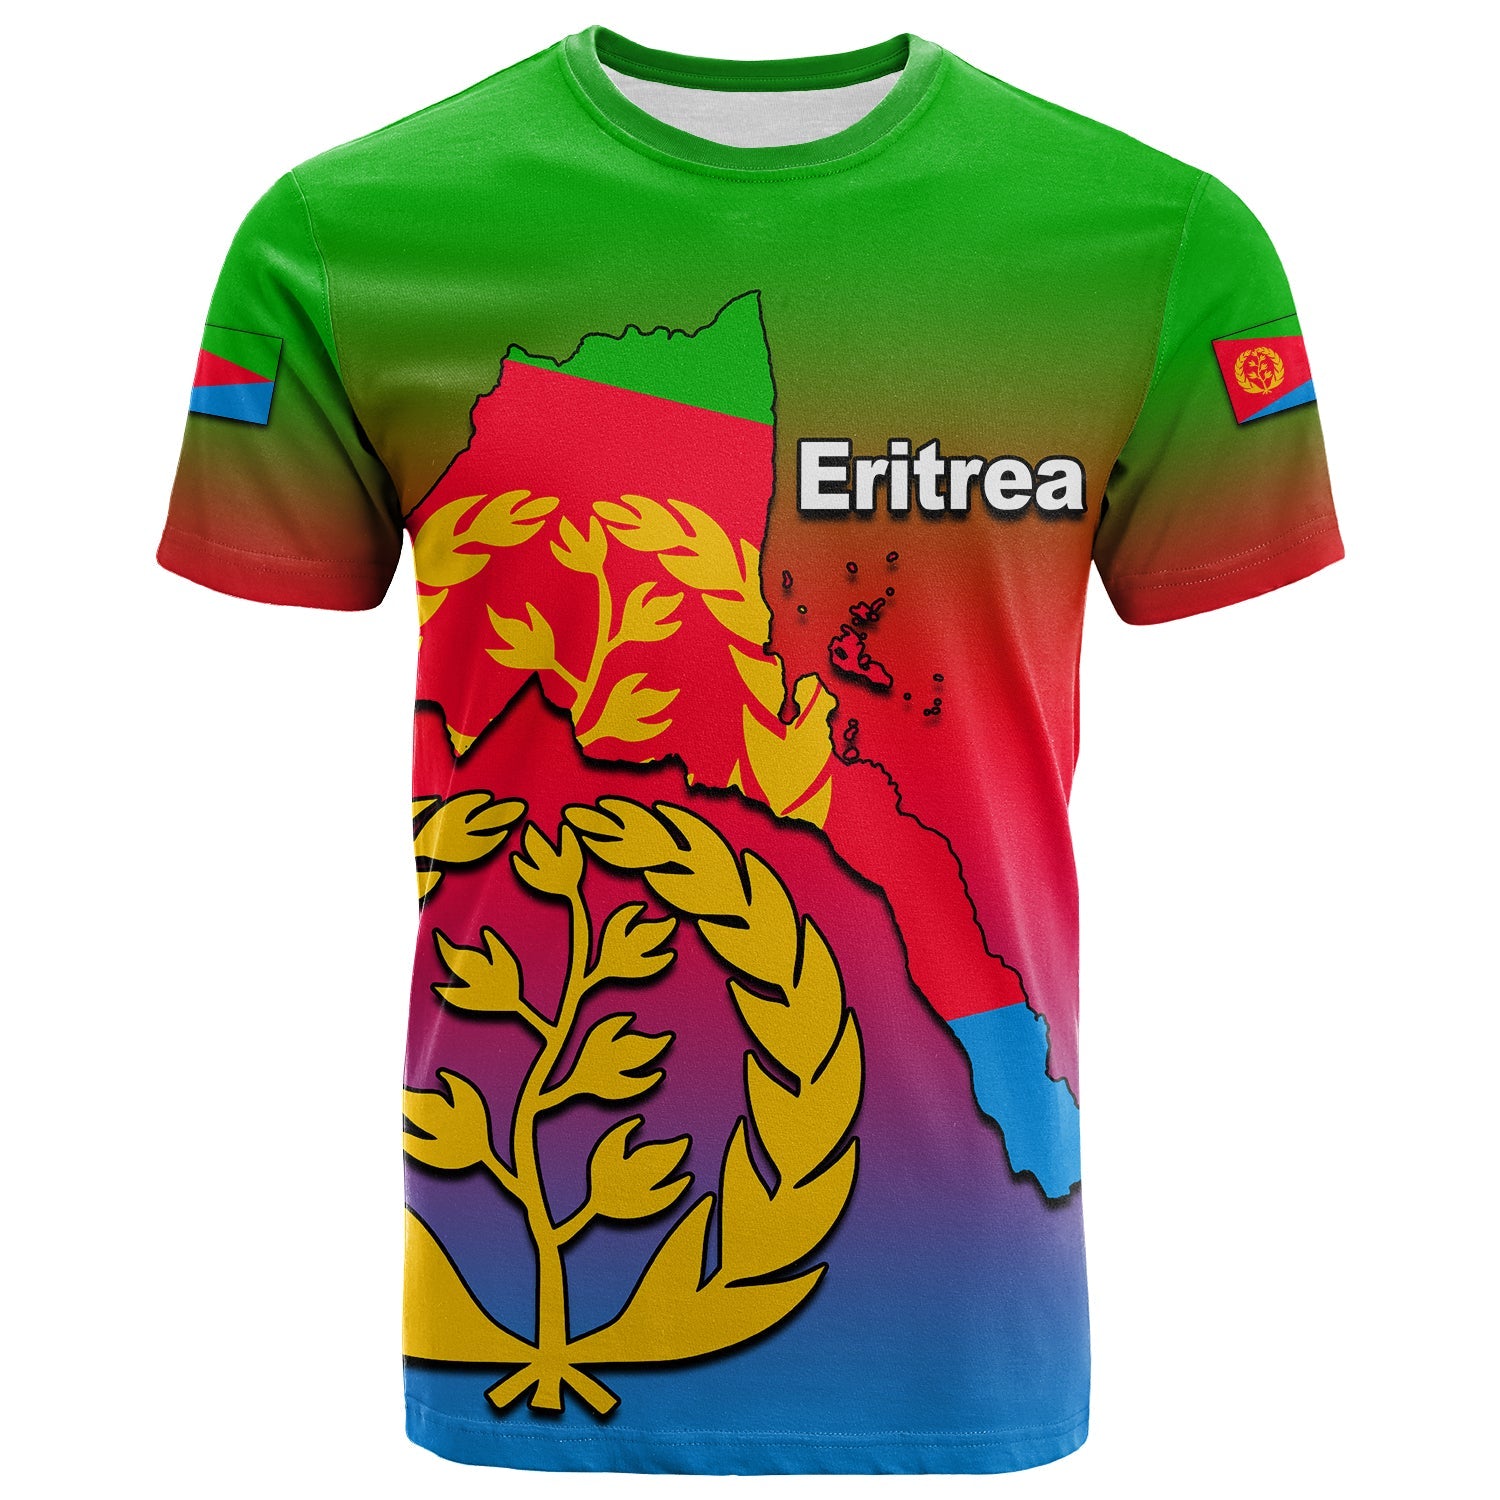 custom-personalised-eritrea-t-shirt-gradient-color-flag-with-map